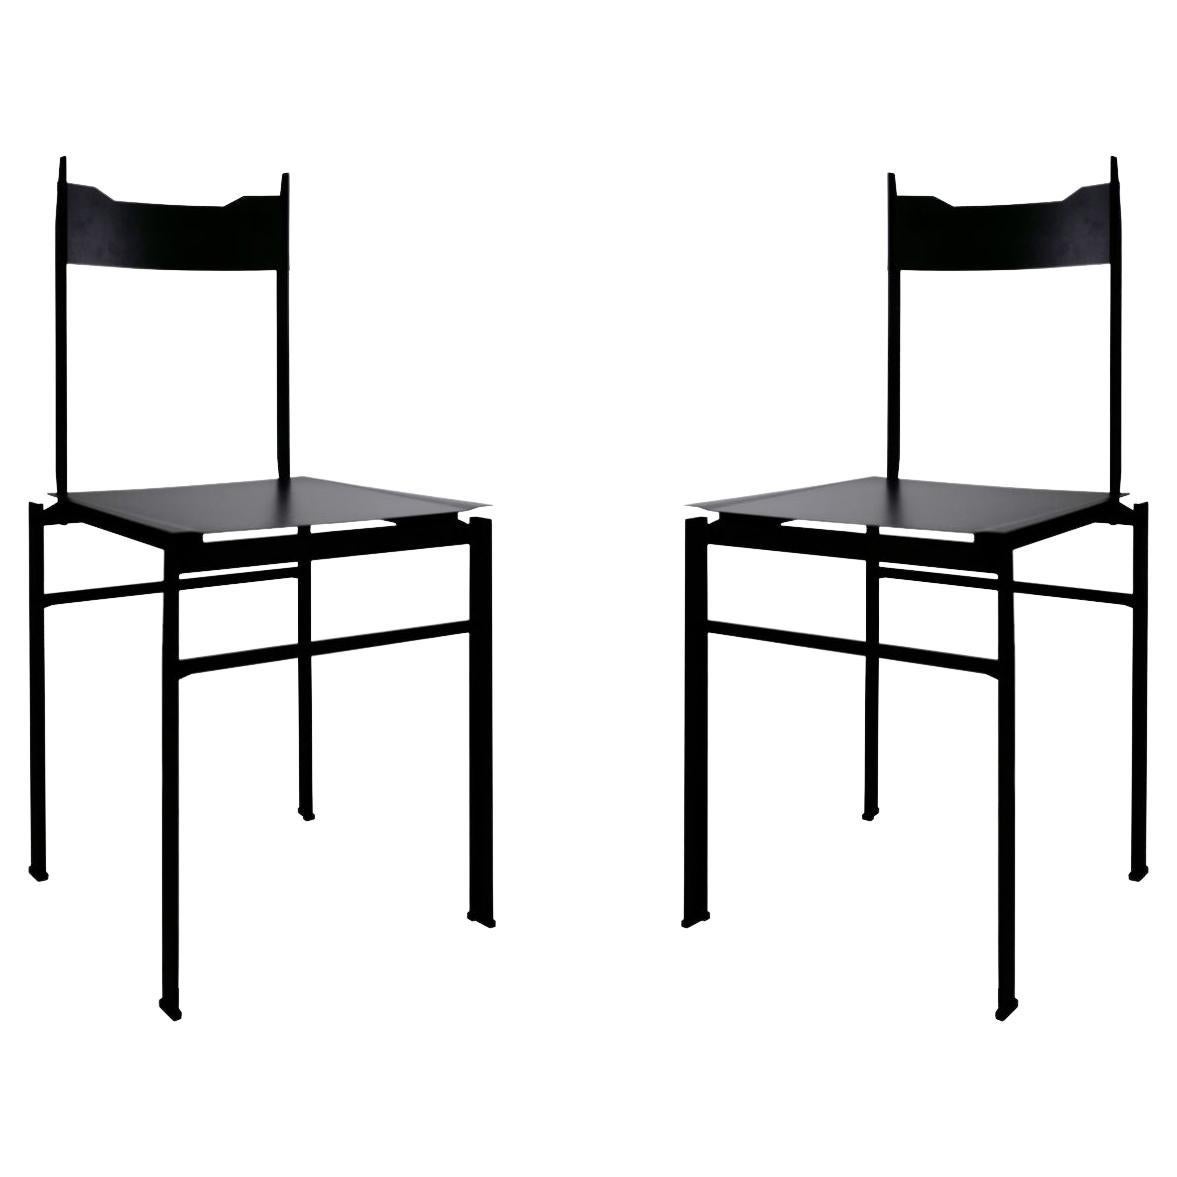 Set of 2 Italian Contemporary Steel and Aluminium Chairs, "Ensis" by Errante For Sale